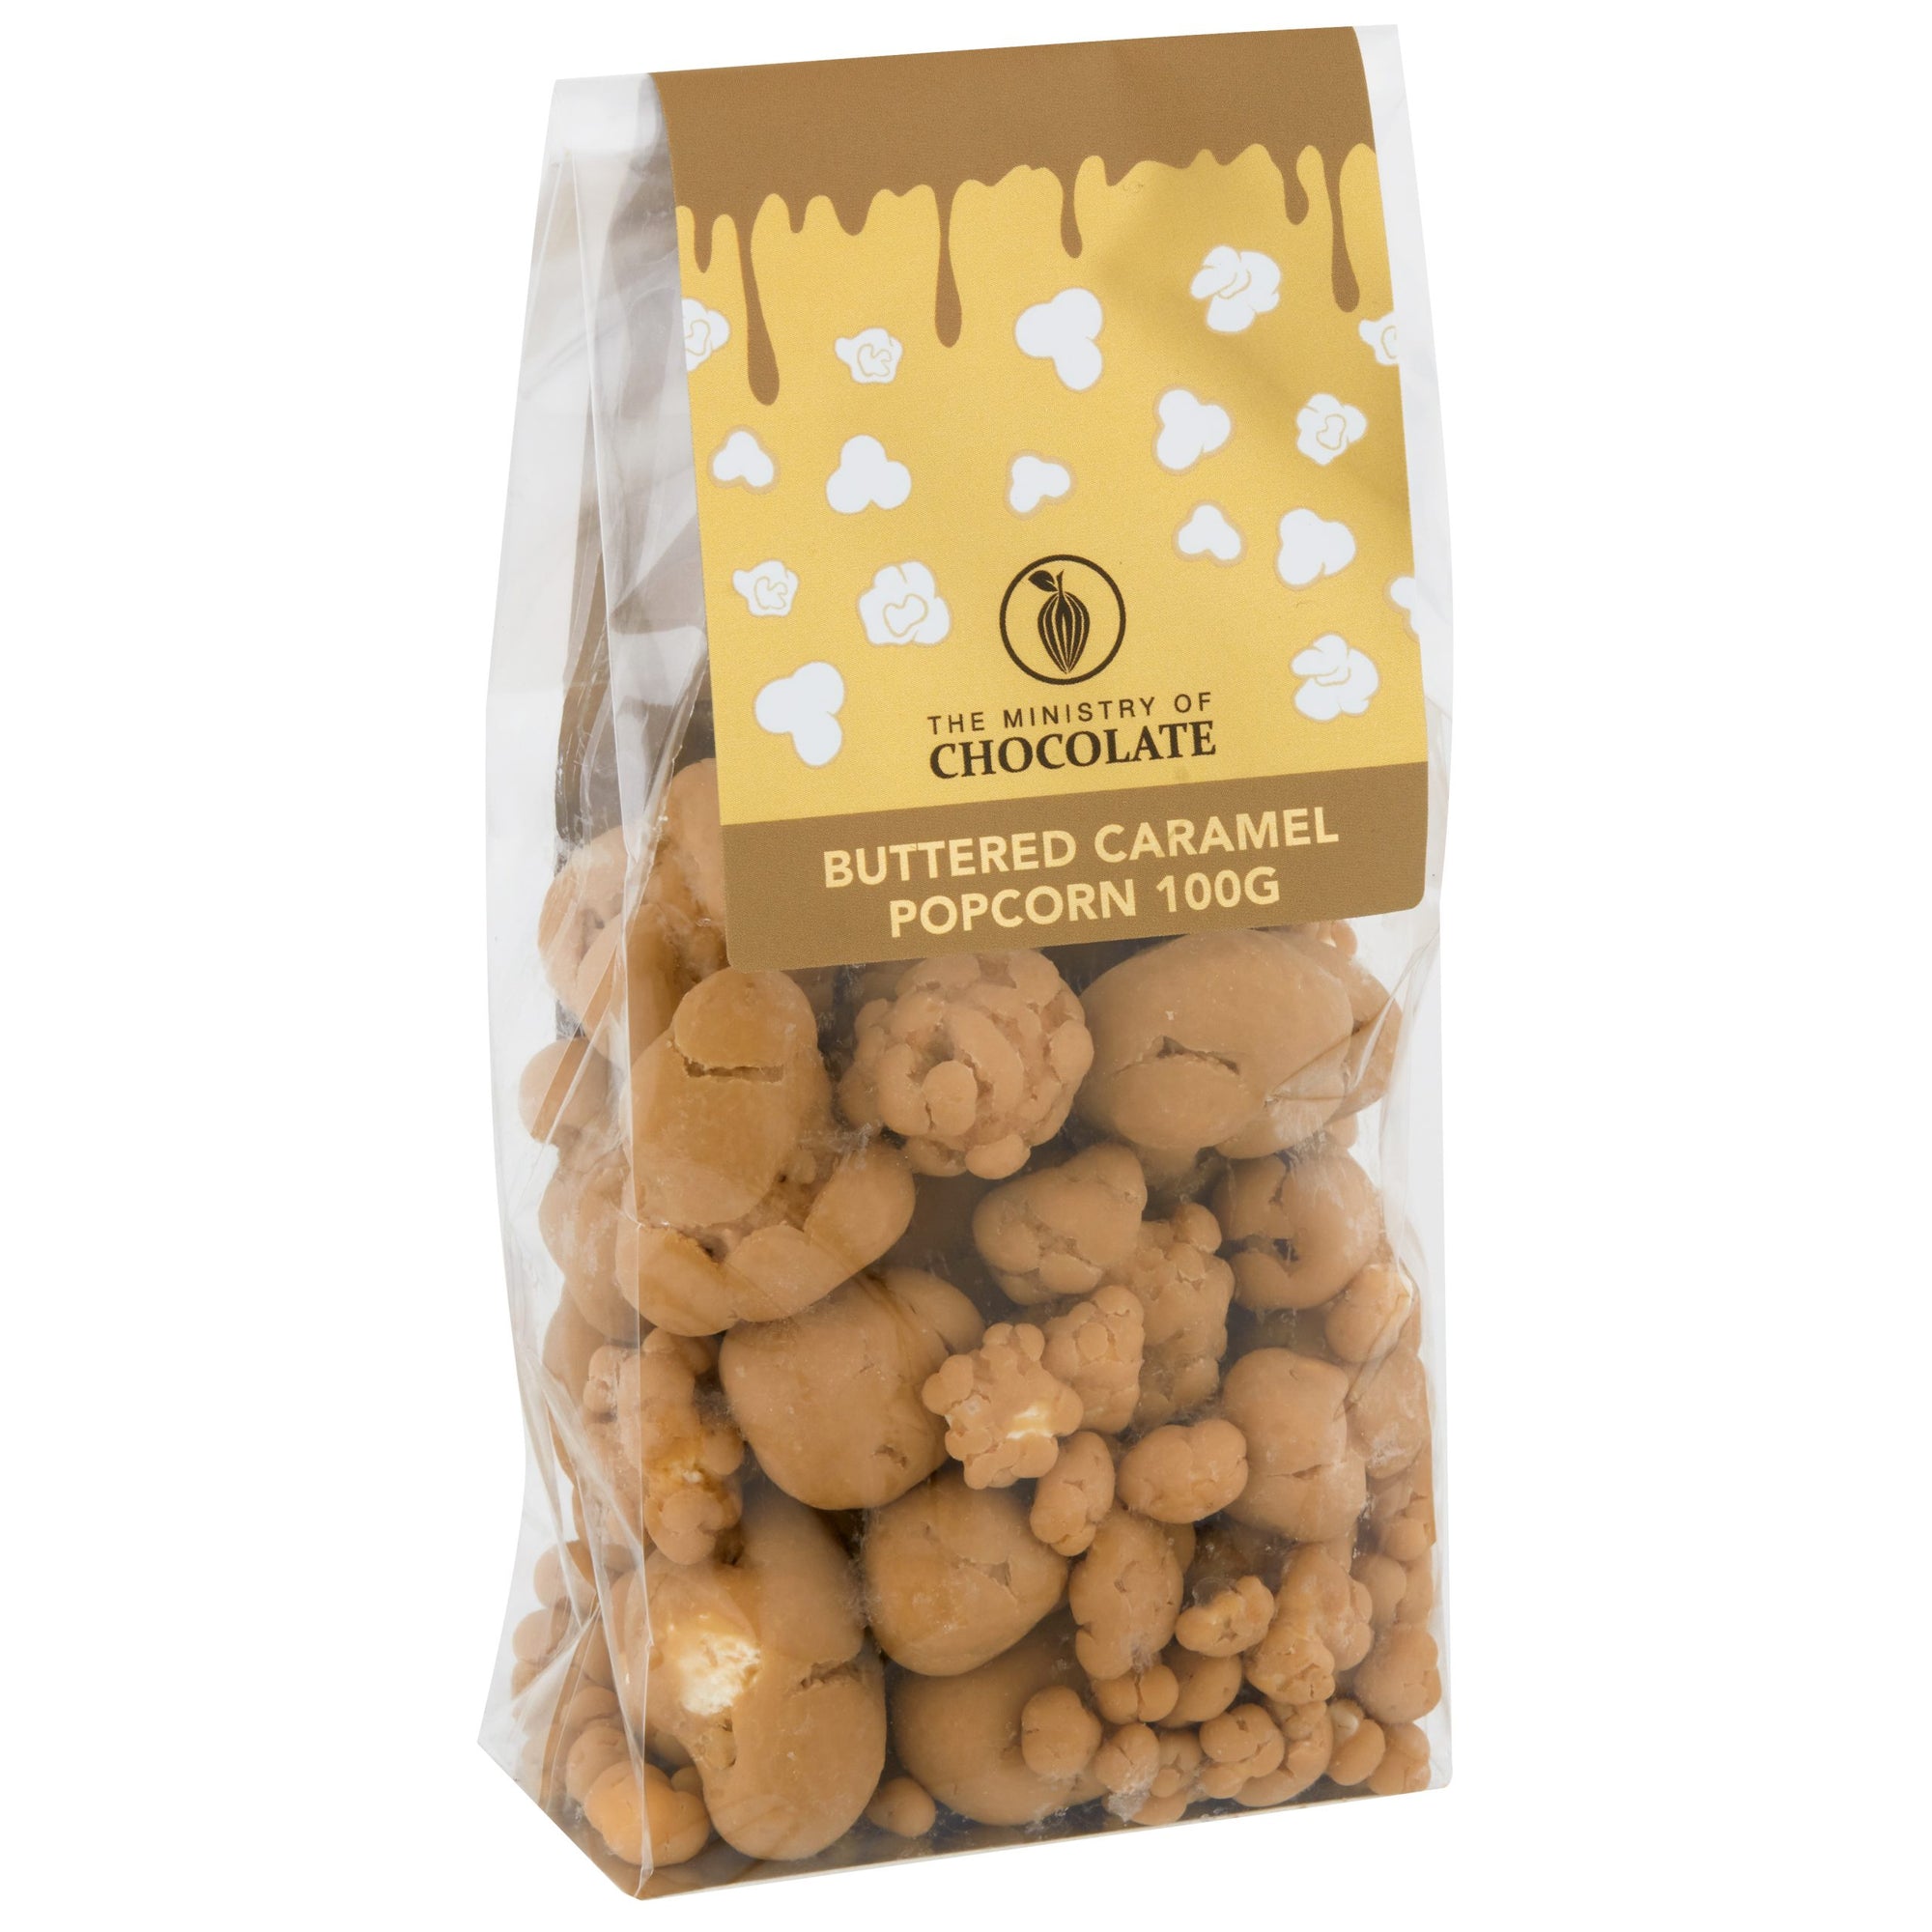 The Ministry of Chocolate Buttered Caramel Popcorn 100g